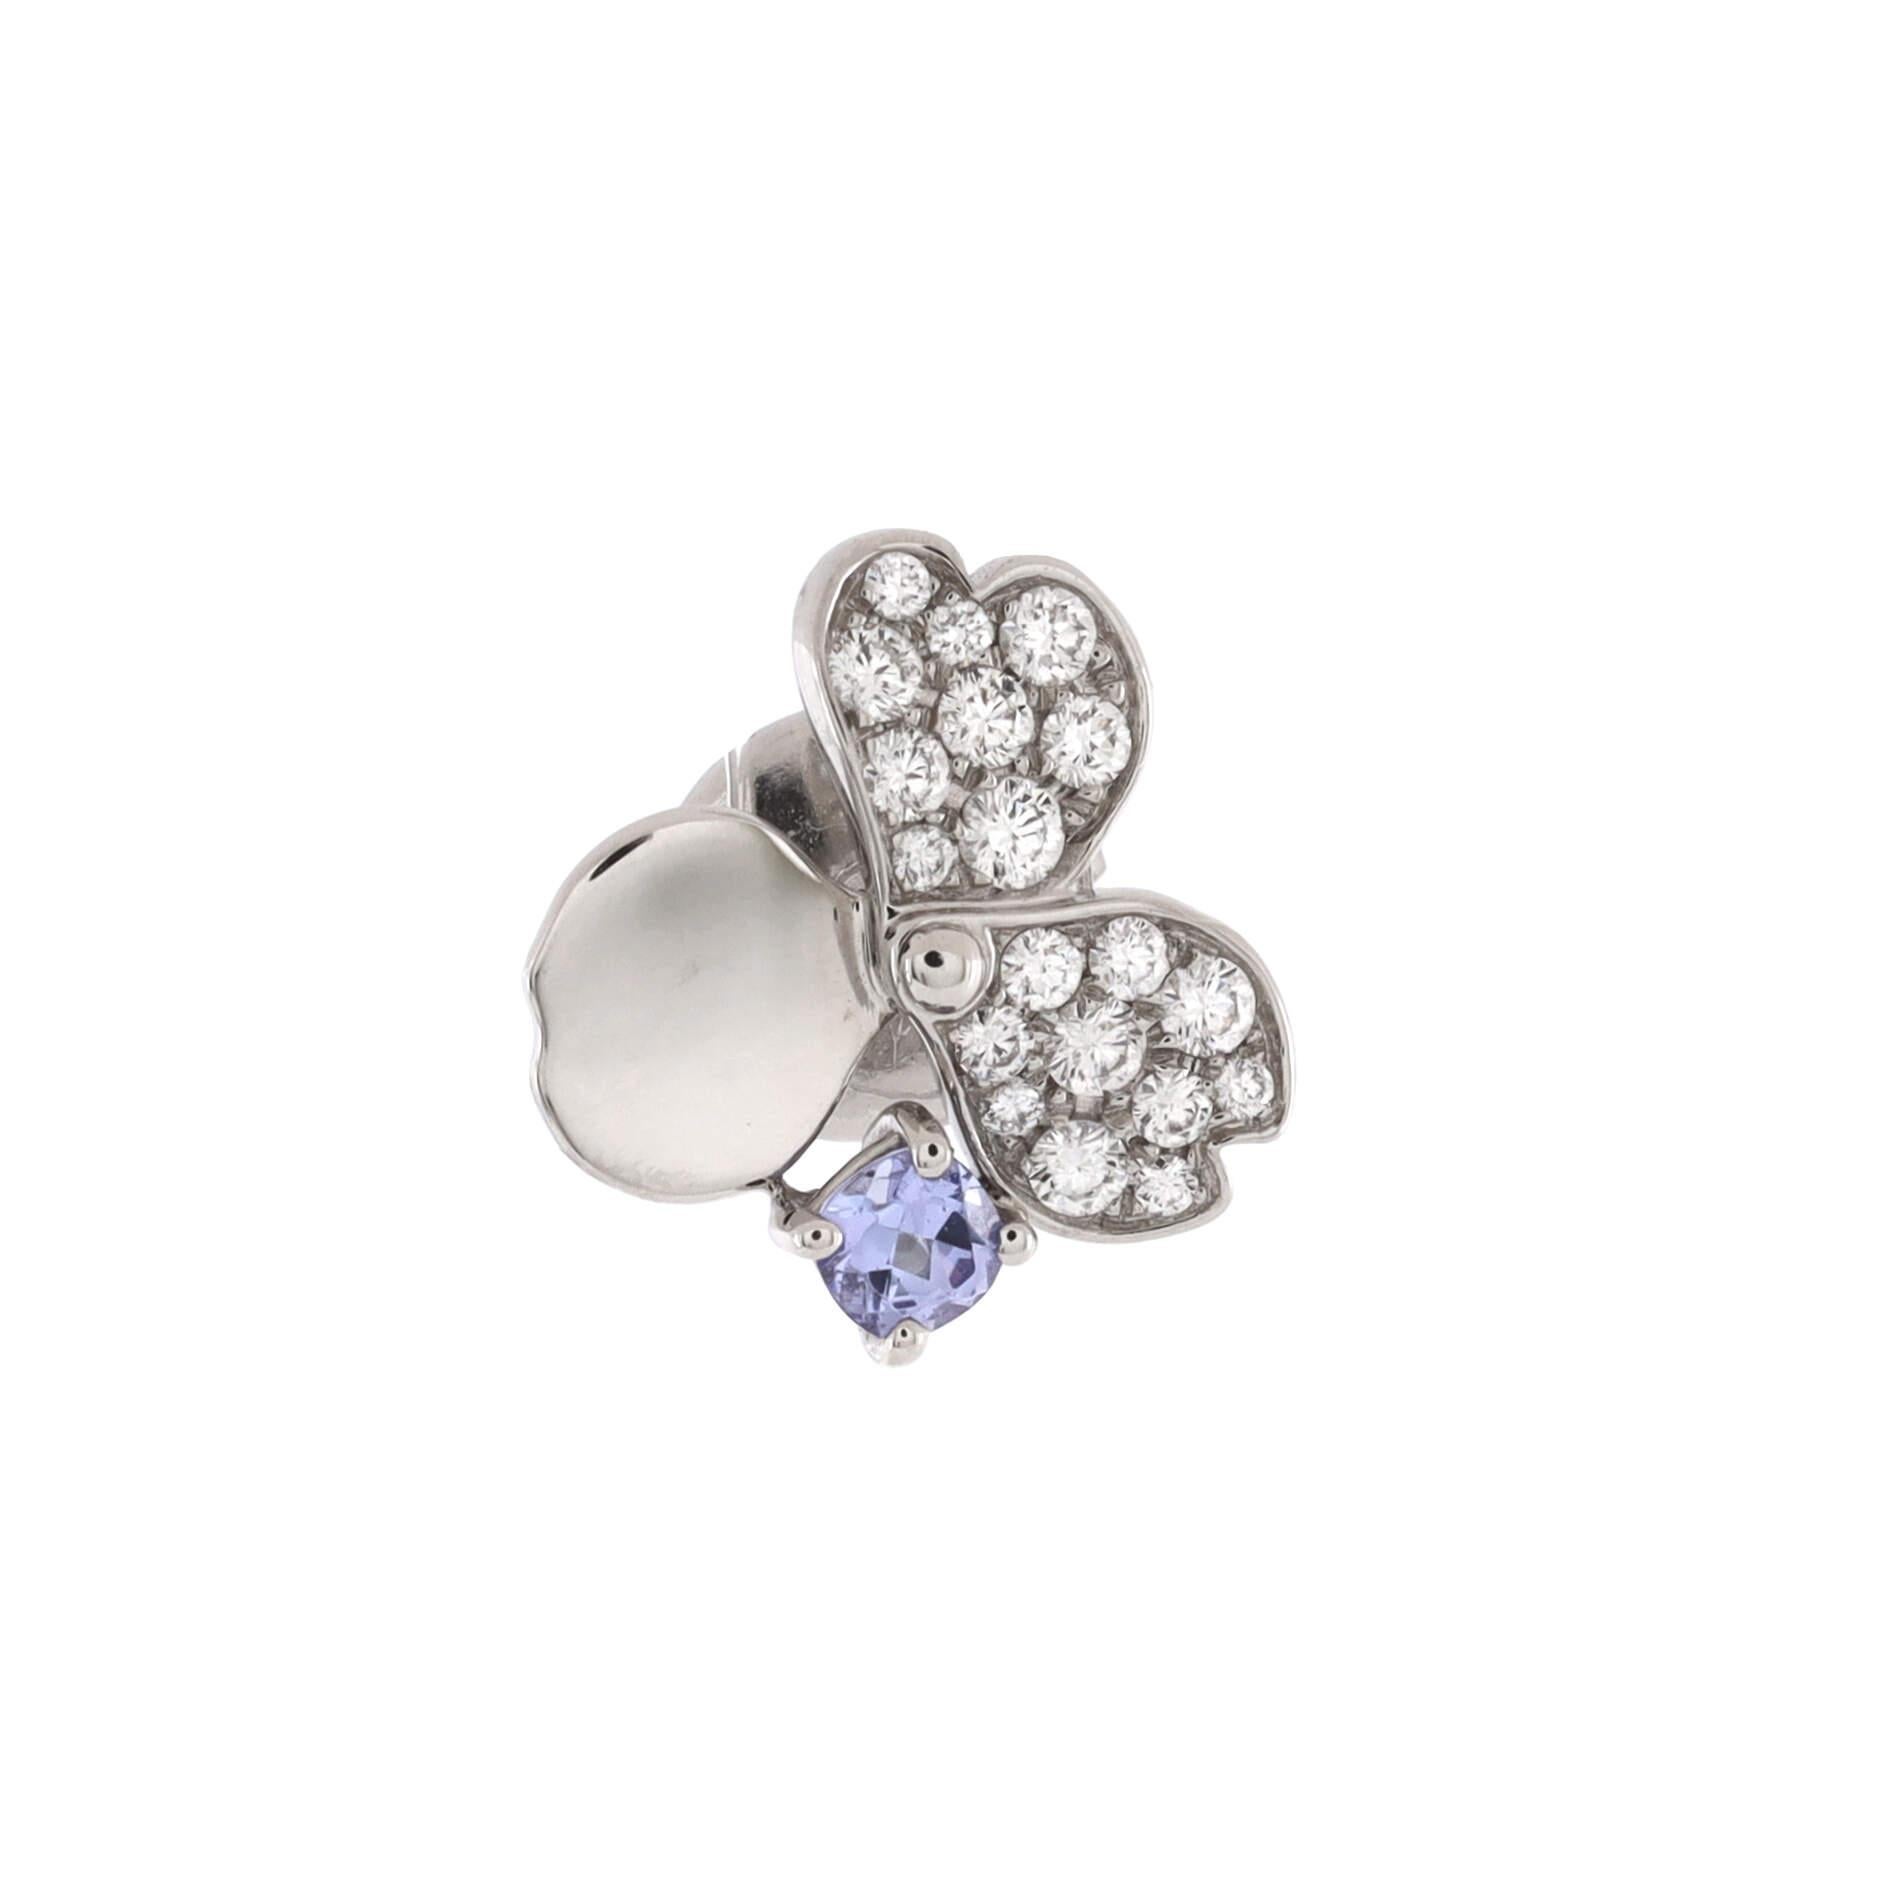 Condition: Excellent. Faint wear throughout.
Accessories: No Accessories
Measurements: Height/Length: 11.65 mm, Width: 11.50 mm
Designer: Tiffany & Co.
Model: Paper Flowers Stud Earrings Platinum with Diamonds and Tanzanites
Exterior Color: